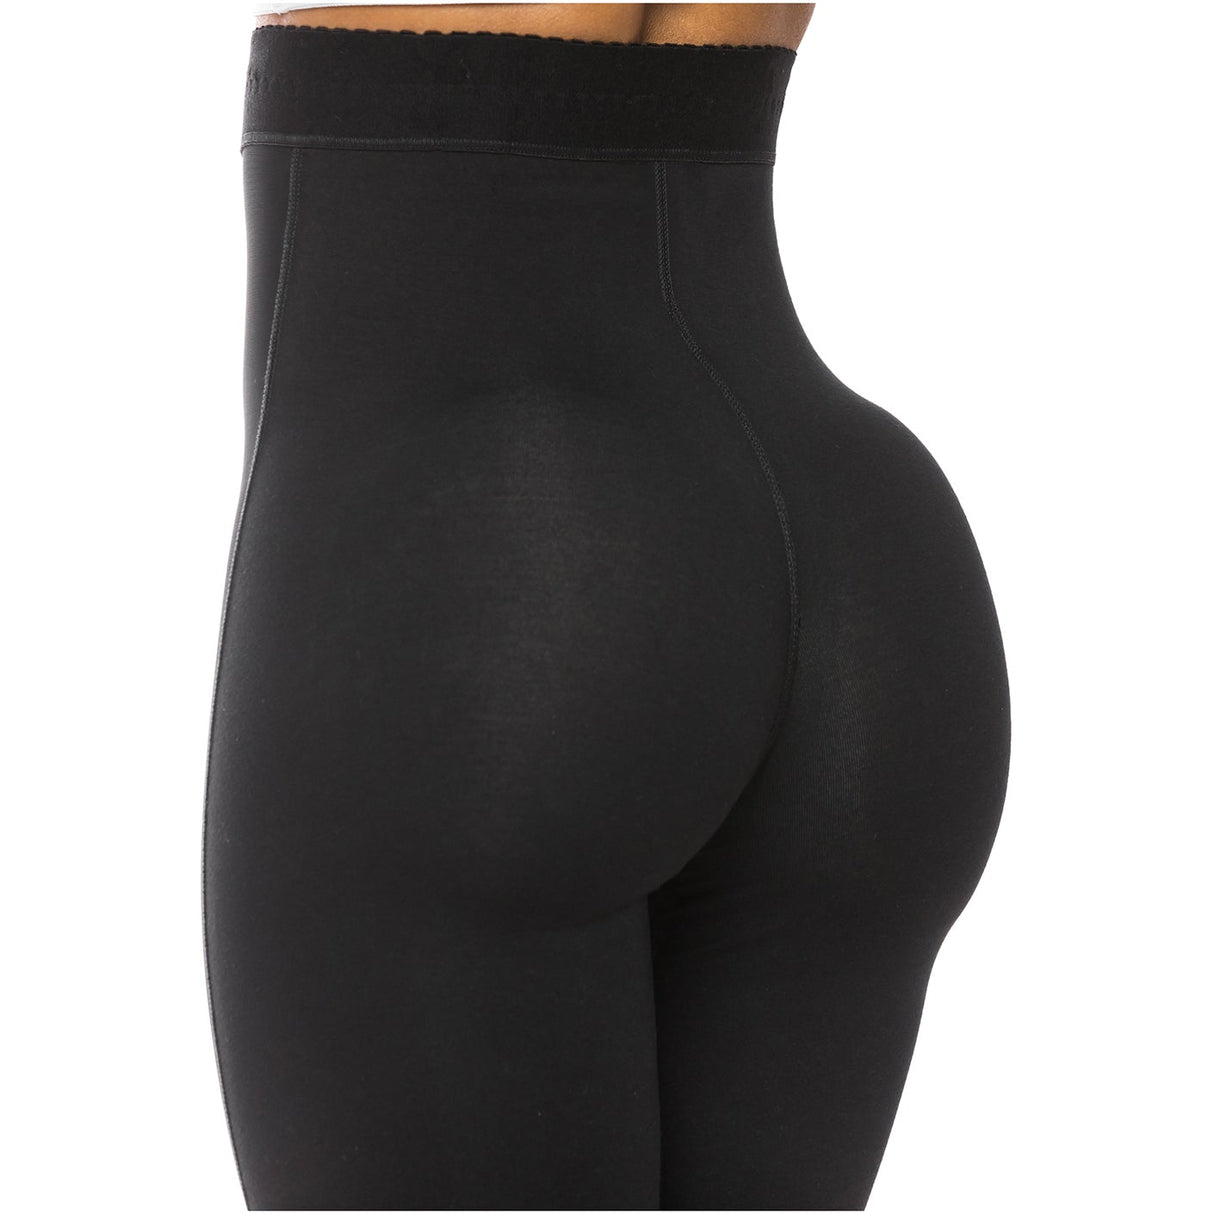 Extra high waist shorts  Shapes and controls abdomen, hips, legs and  buttocks with low compression